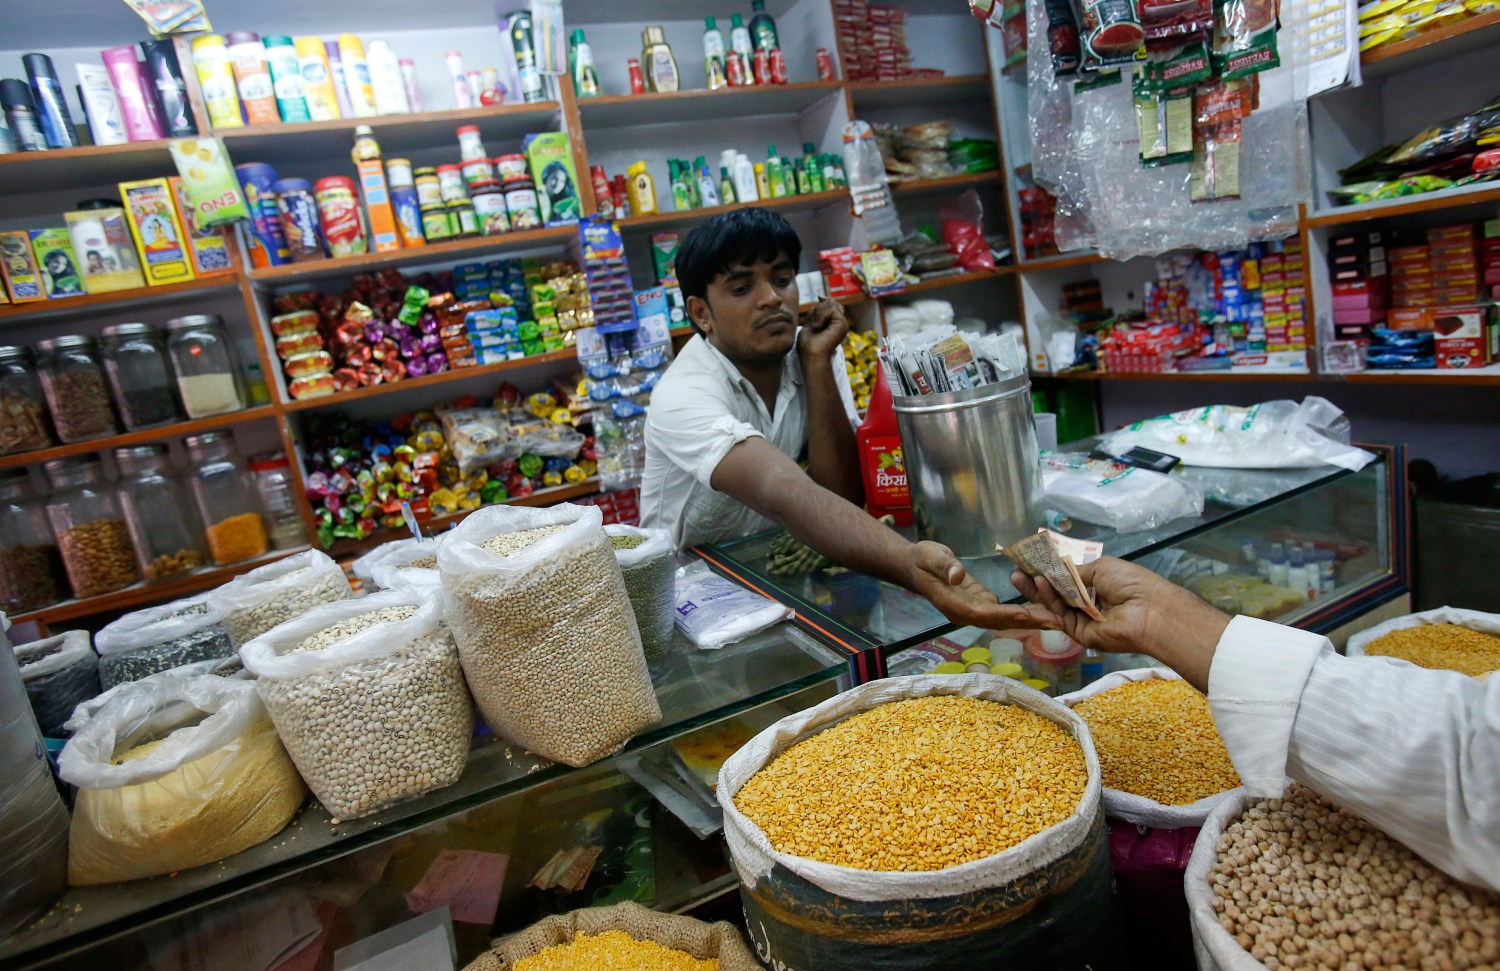 The owner of a "Kirana" or mom-and-pop grocery store accepts money from a customer in his shop in Mumbai December 7, 2012. The Indian government won a second parliament vote on Friday on allowing foreign supermarkets into the country, paving the way for Prime Minister Manmohan Singh to press ahead with more reforms, including freeing up a cash-strapped insurance sector. REUTERS/Vivek Prakash (INDIA - Tags: BUSINESS FOOD) - GM1E8C71Q3R01